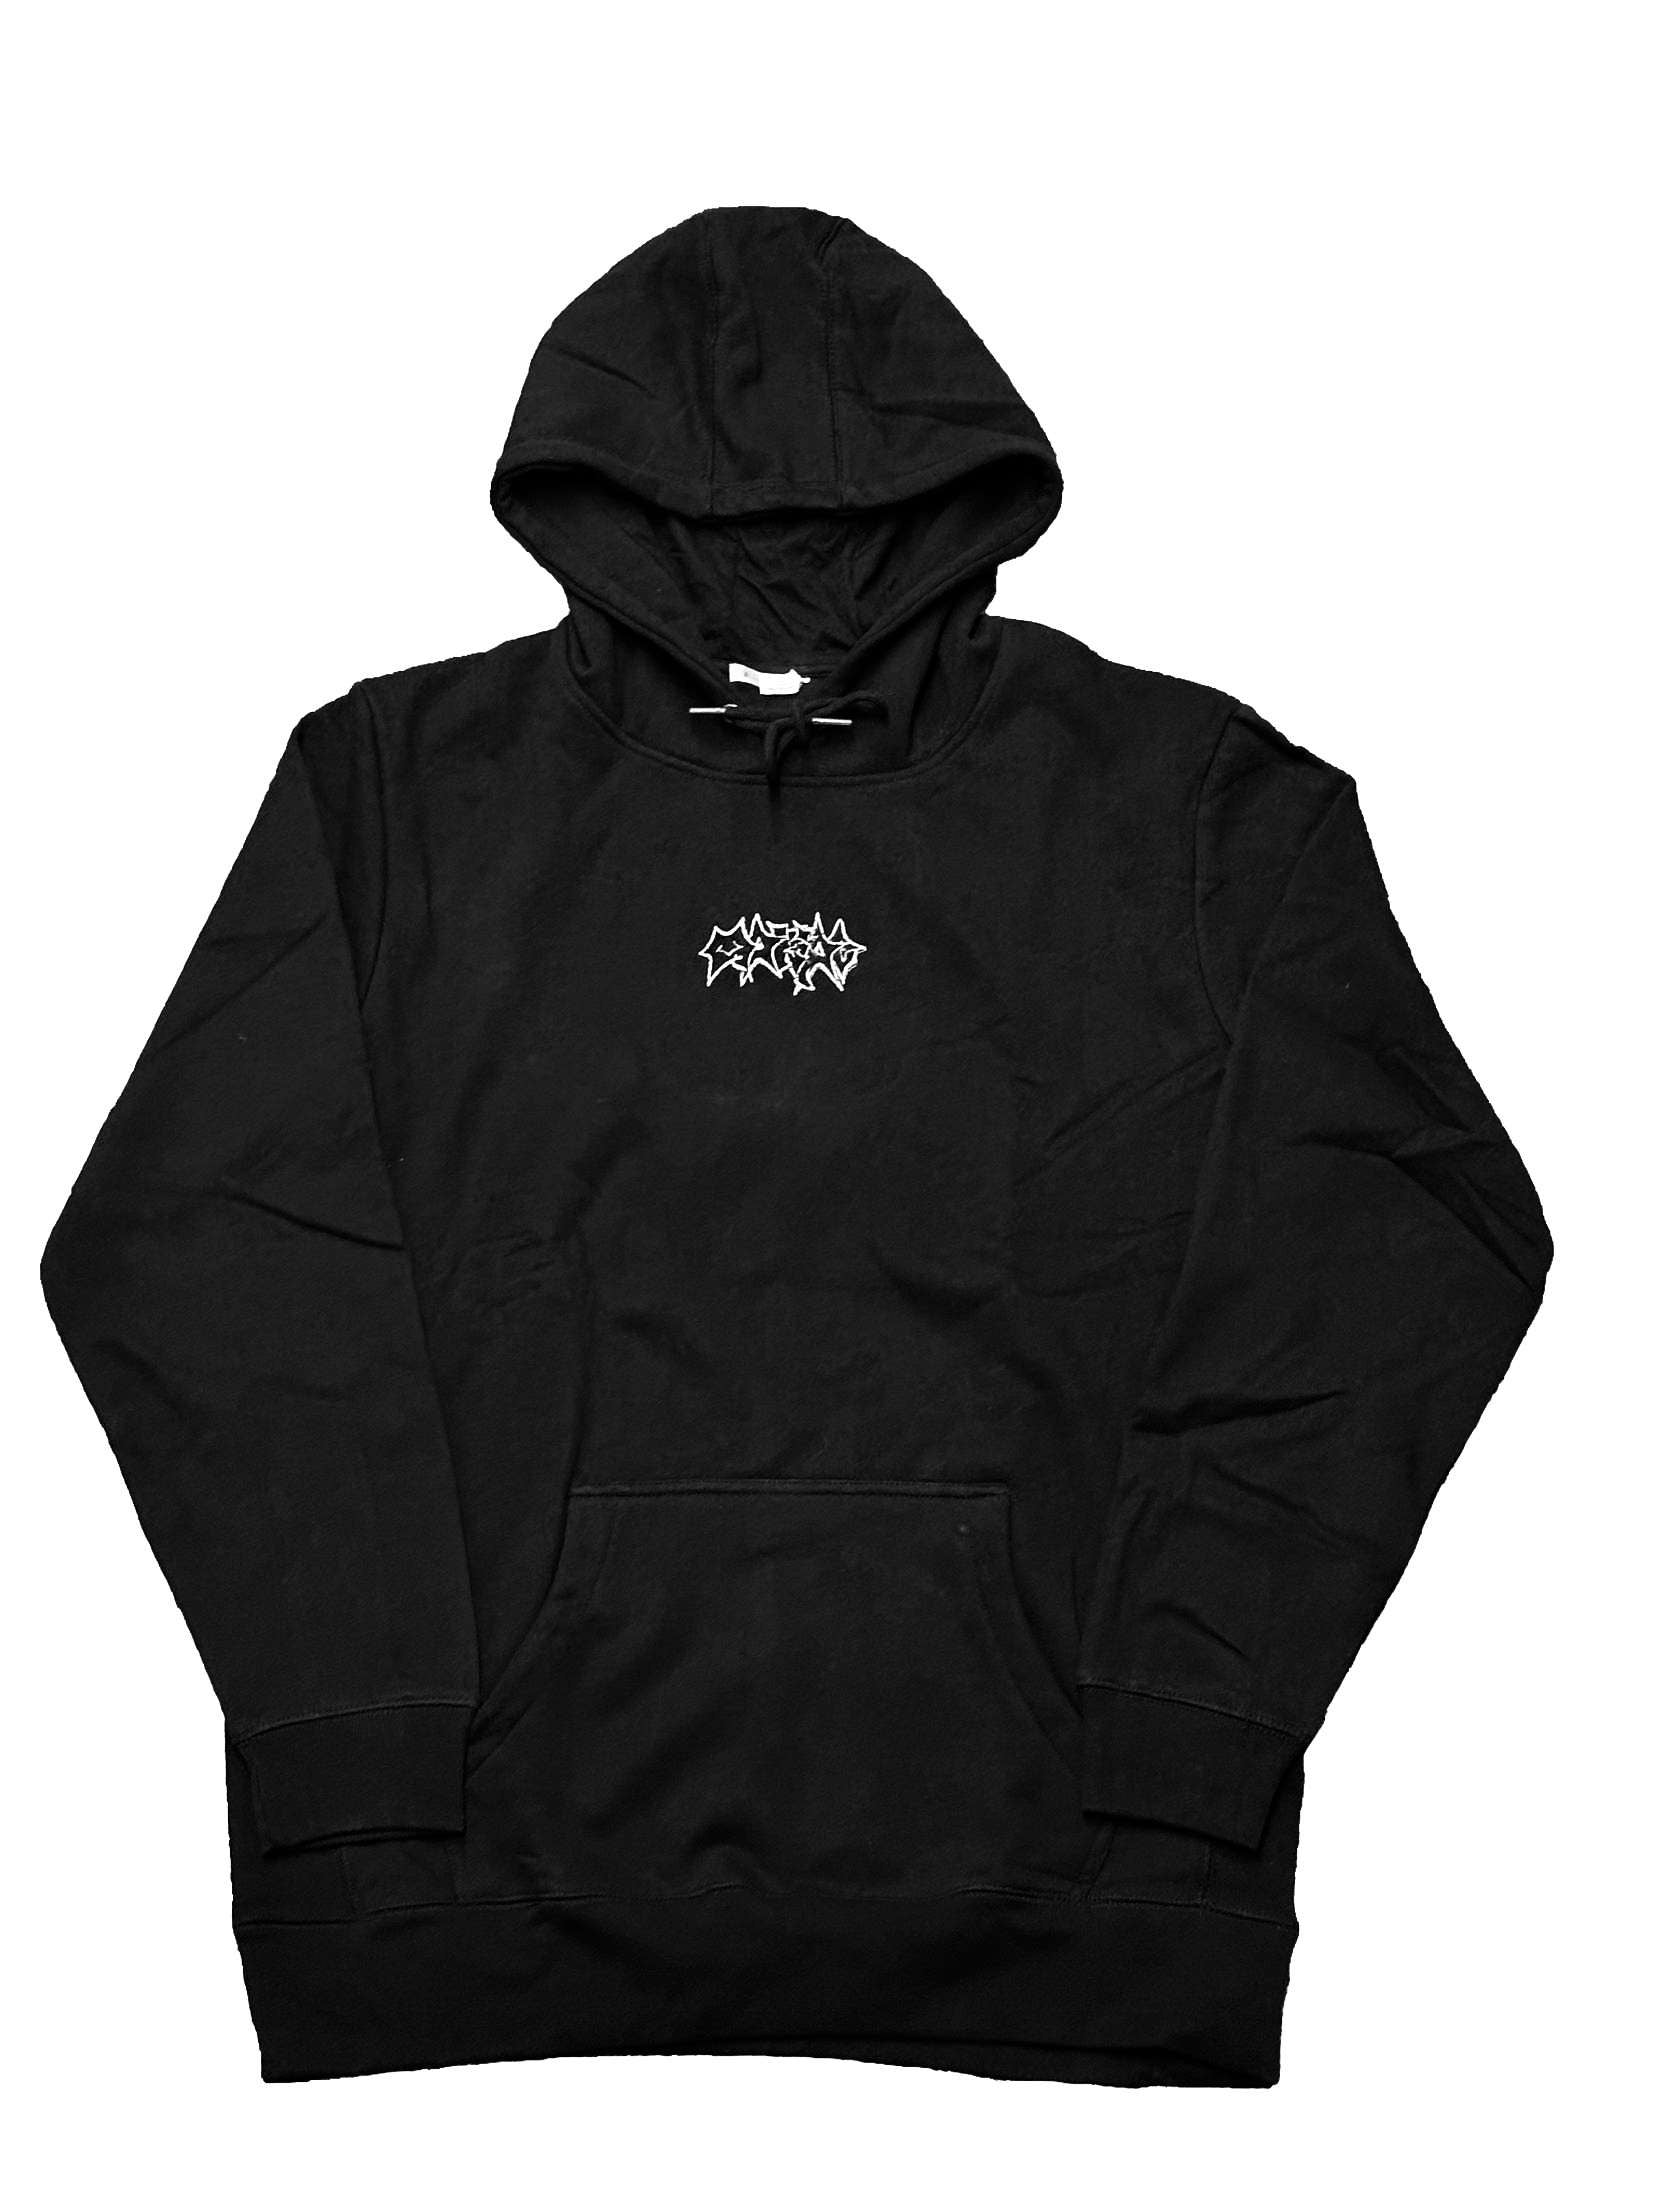 Authentic Outsider SOE Hoodie – Black Maple Trading Co.